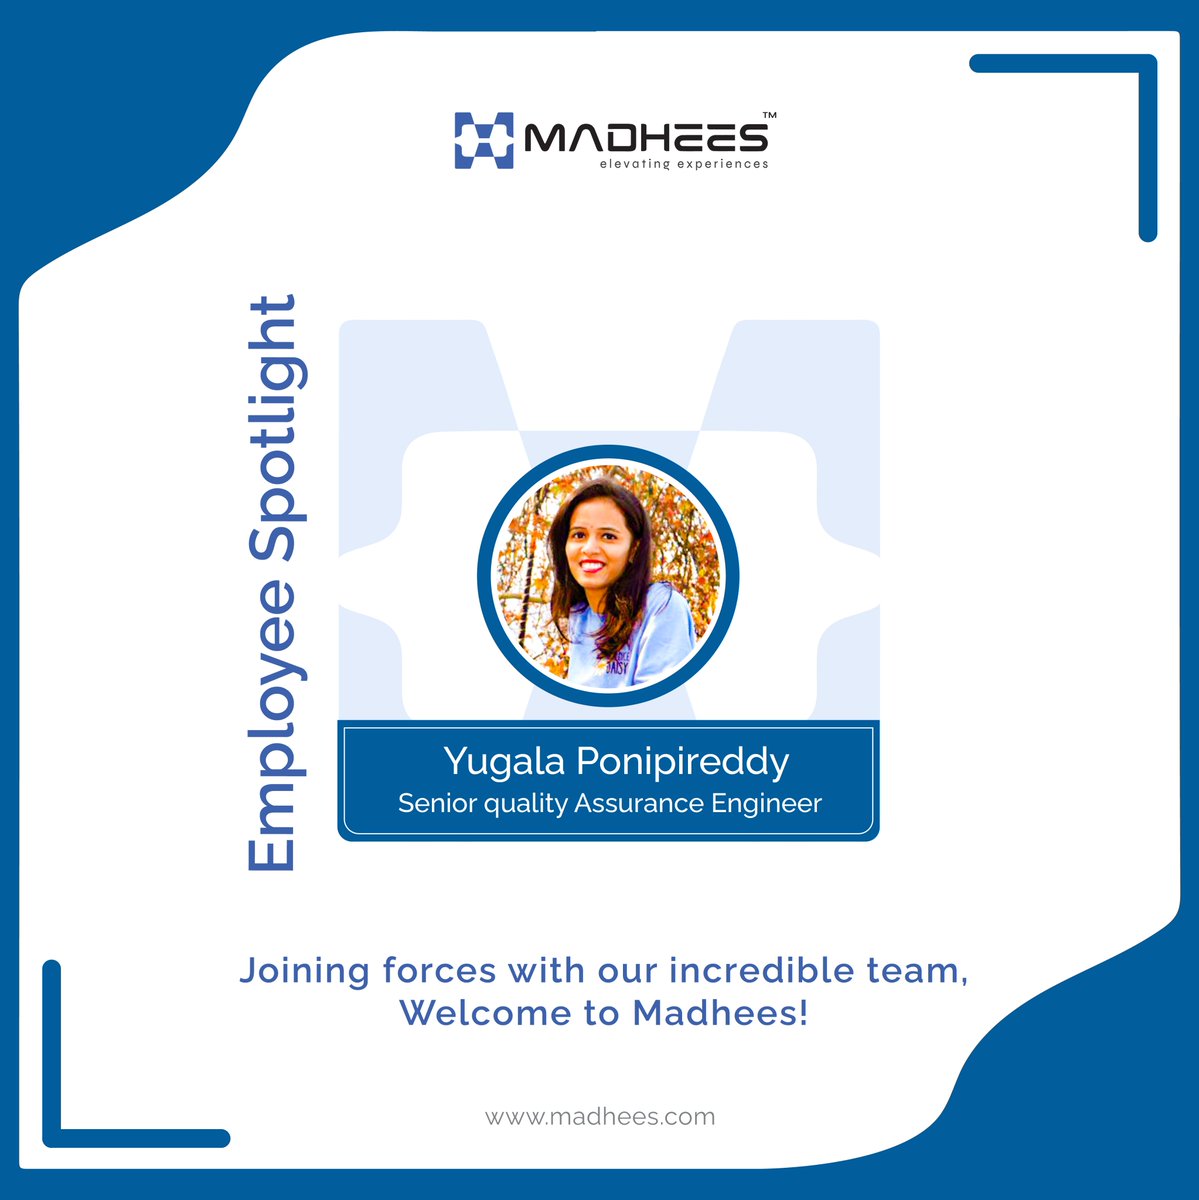 🎉 Joining forces with the best! 🤝 Let's extend a warm welcome to our newest team member Yugala Ponipireddy ! Together, we'll soar to new heights! ✨

#team #newjoinee #teammadhees #spotlight #team #teambuilding #employees